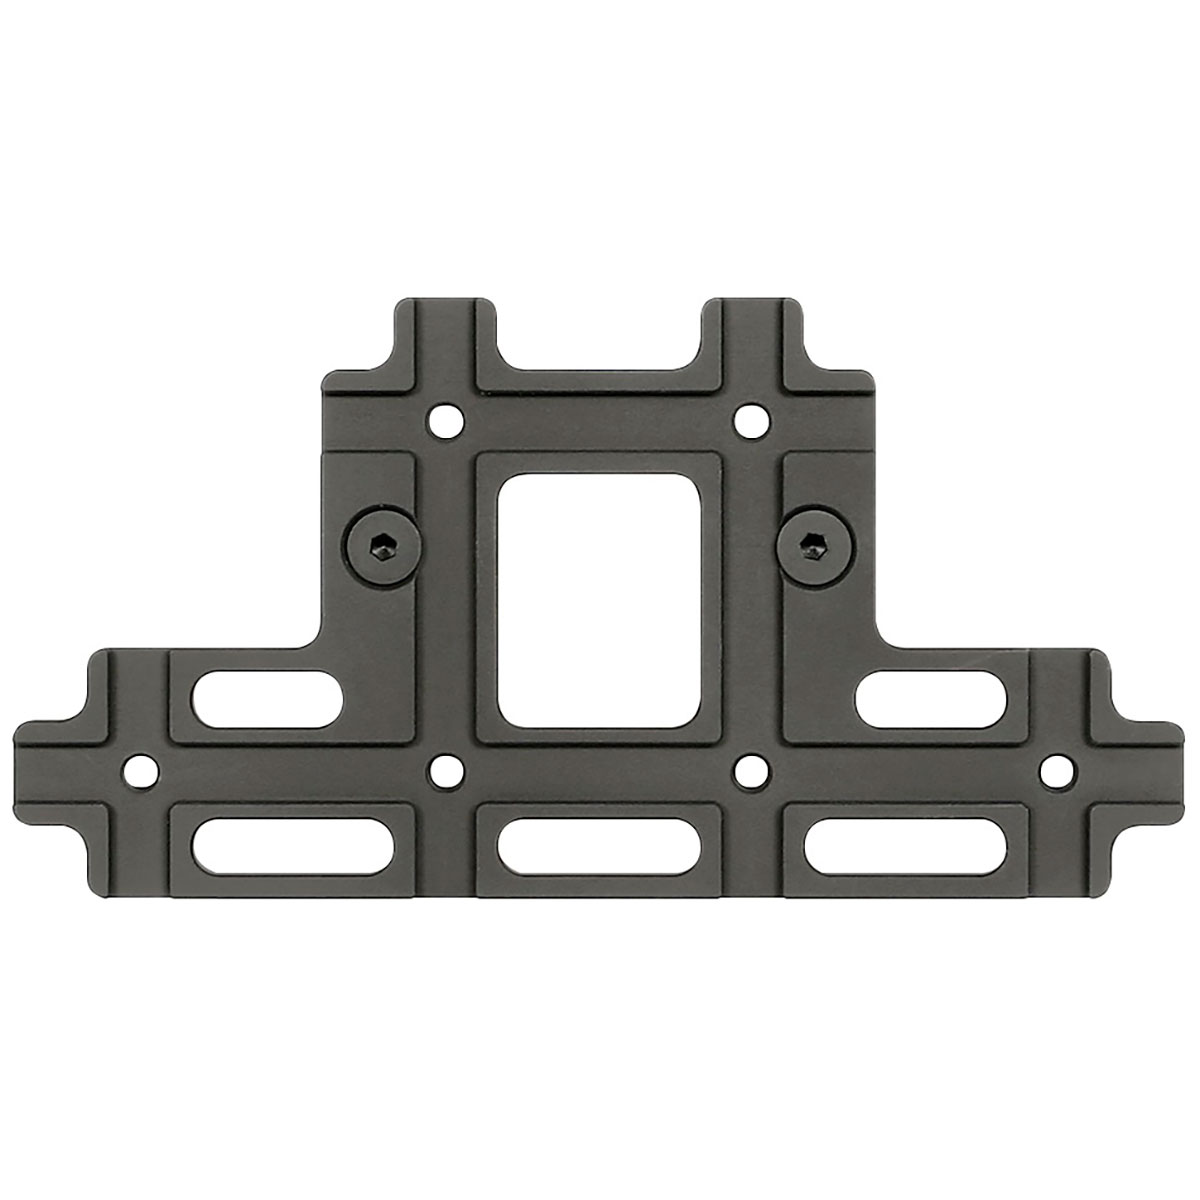 MIDWEST INDUSTRIES, INC. - LEVER GUN STOCK SHELL HOLDER PLATE & SHELL HOLDERS